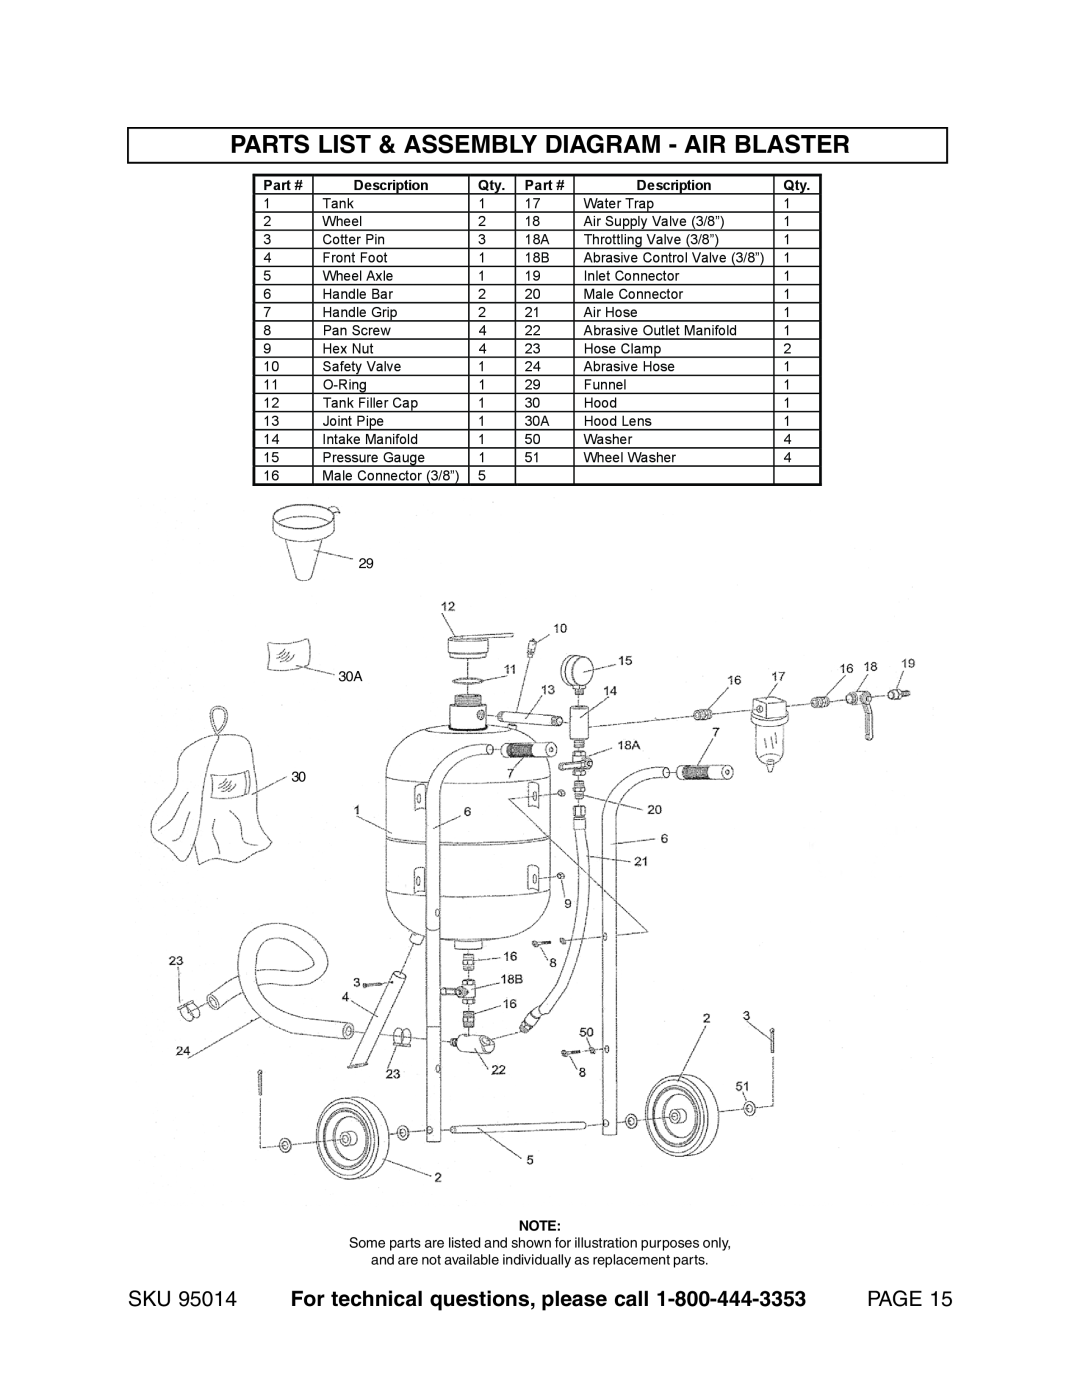 Harbor Freight Tools 95014 Parts List & Assembly Diagram - Air Blaster, For technical questions, please call, Page 